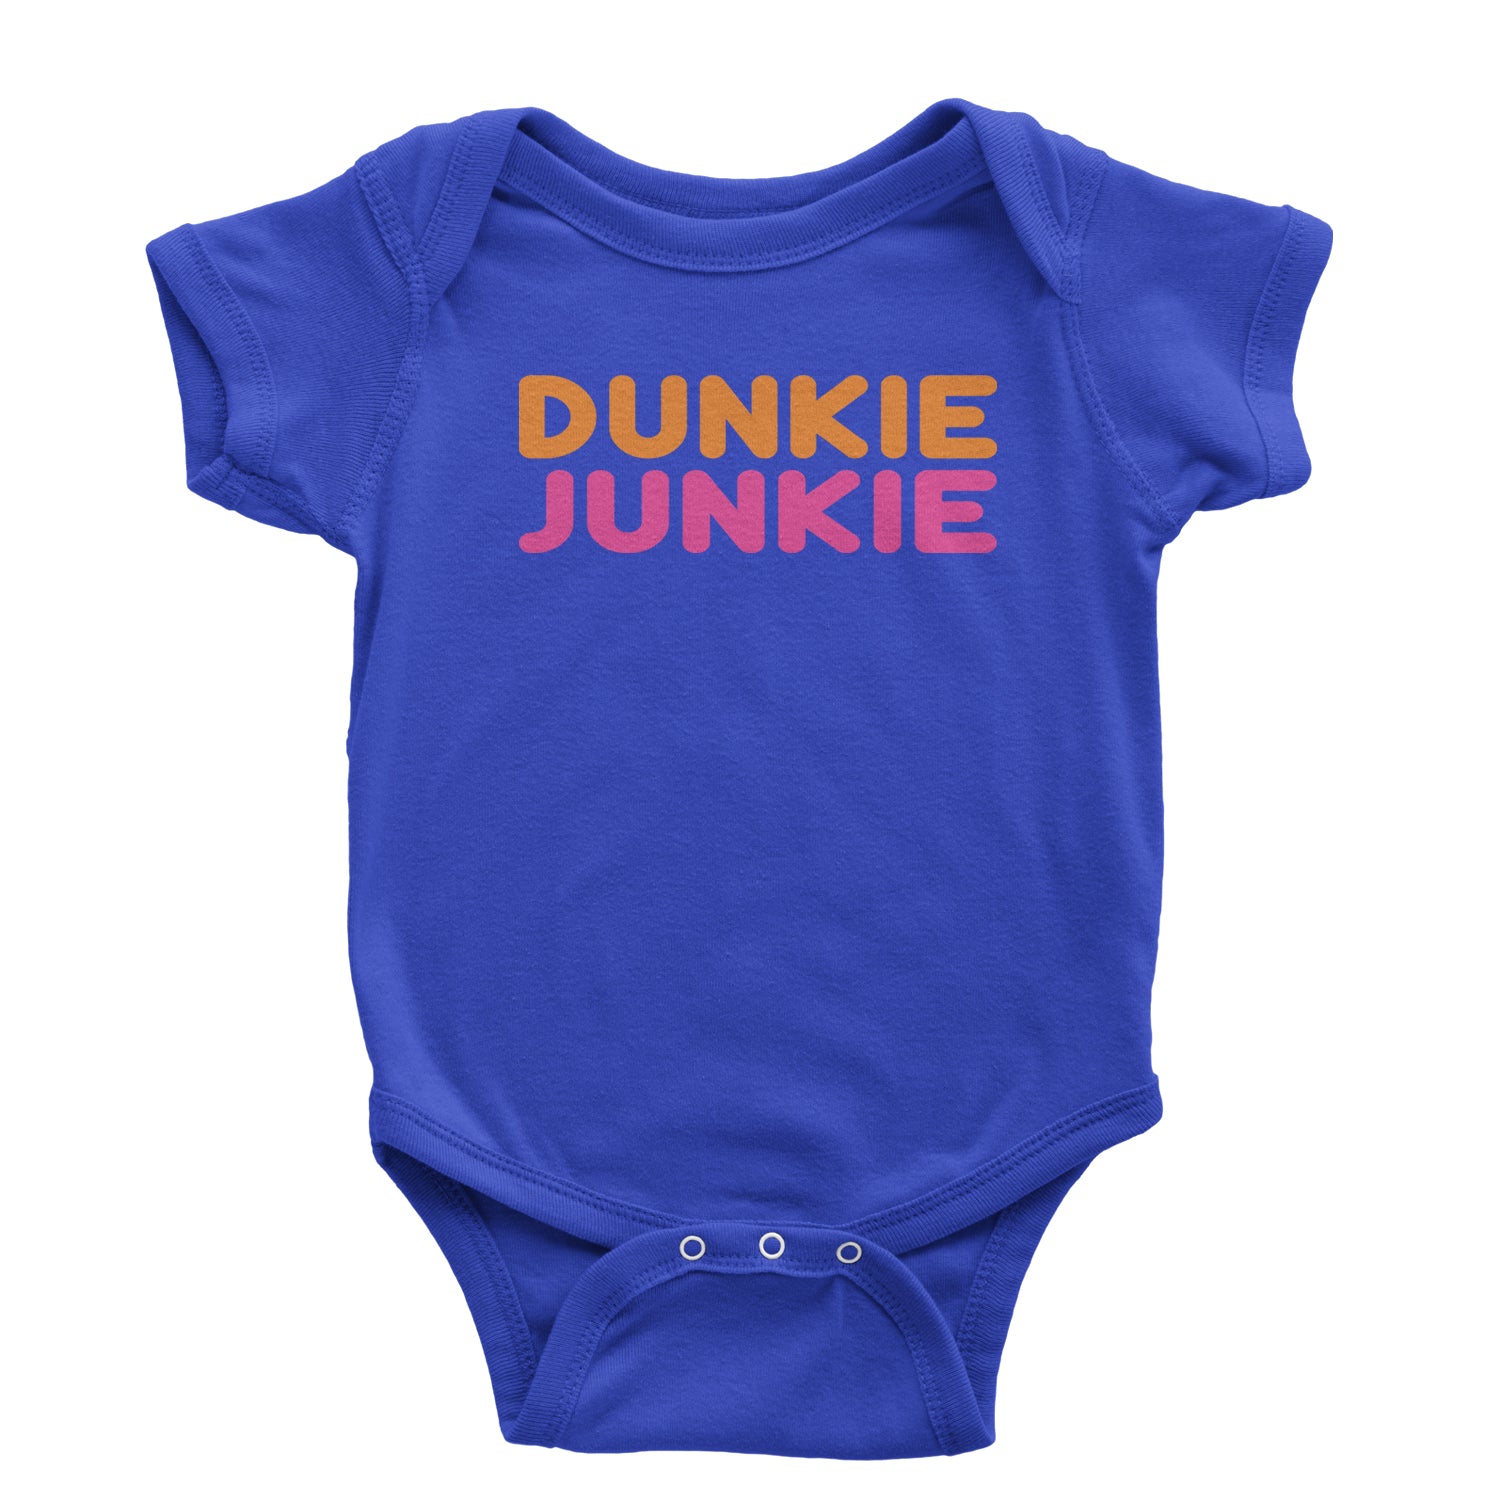 Dunkie Junkie Infant One-Piece Romper Bodysuit and Toddler T-shirt addict, capuccino, coffee, dd, dnkn, dunkin, dunking, latte by Expression Tees